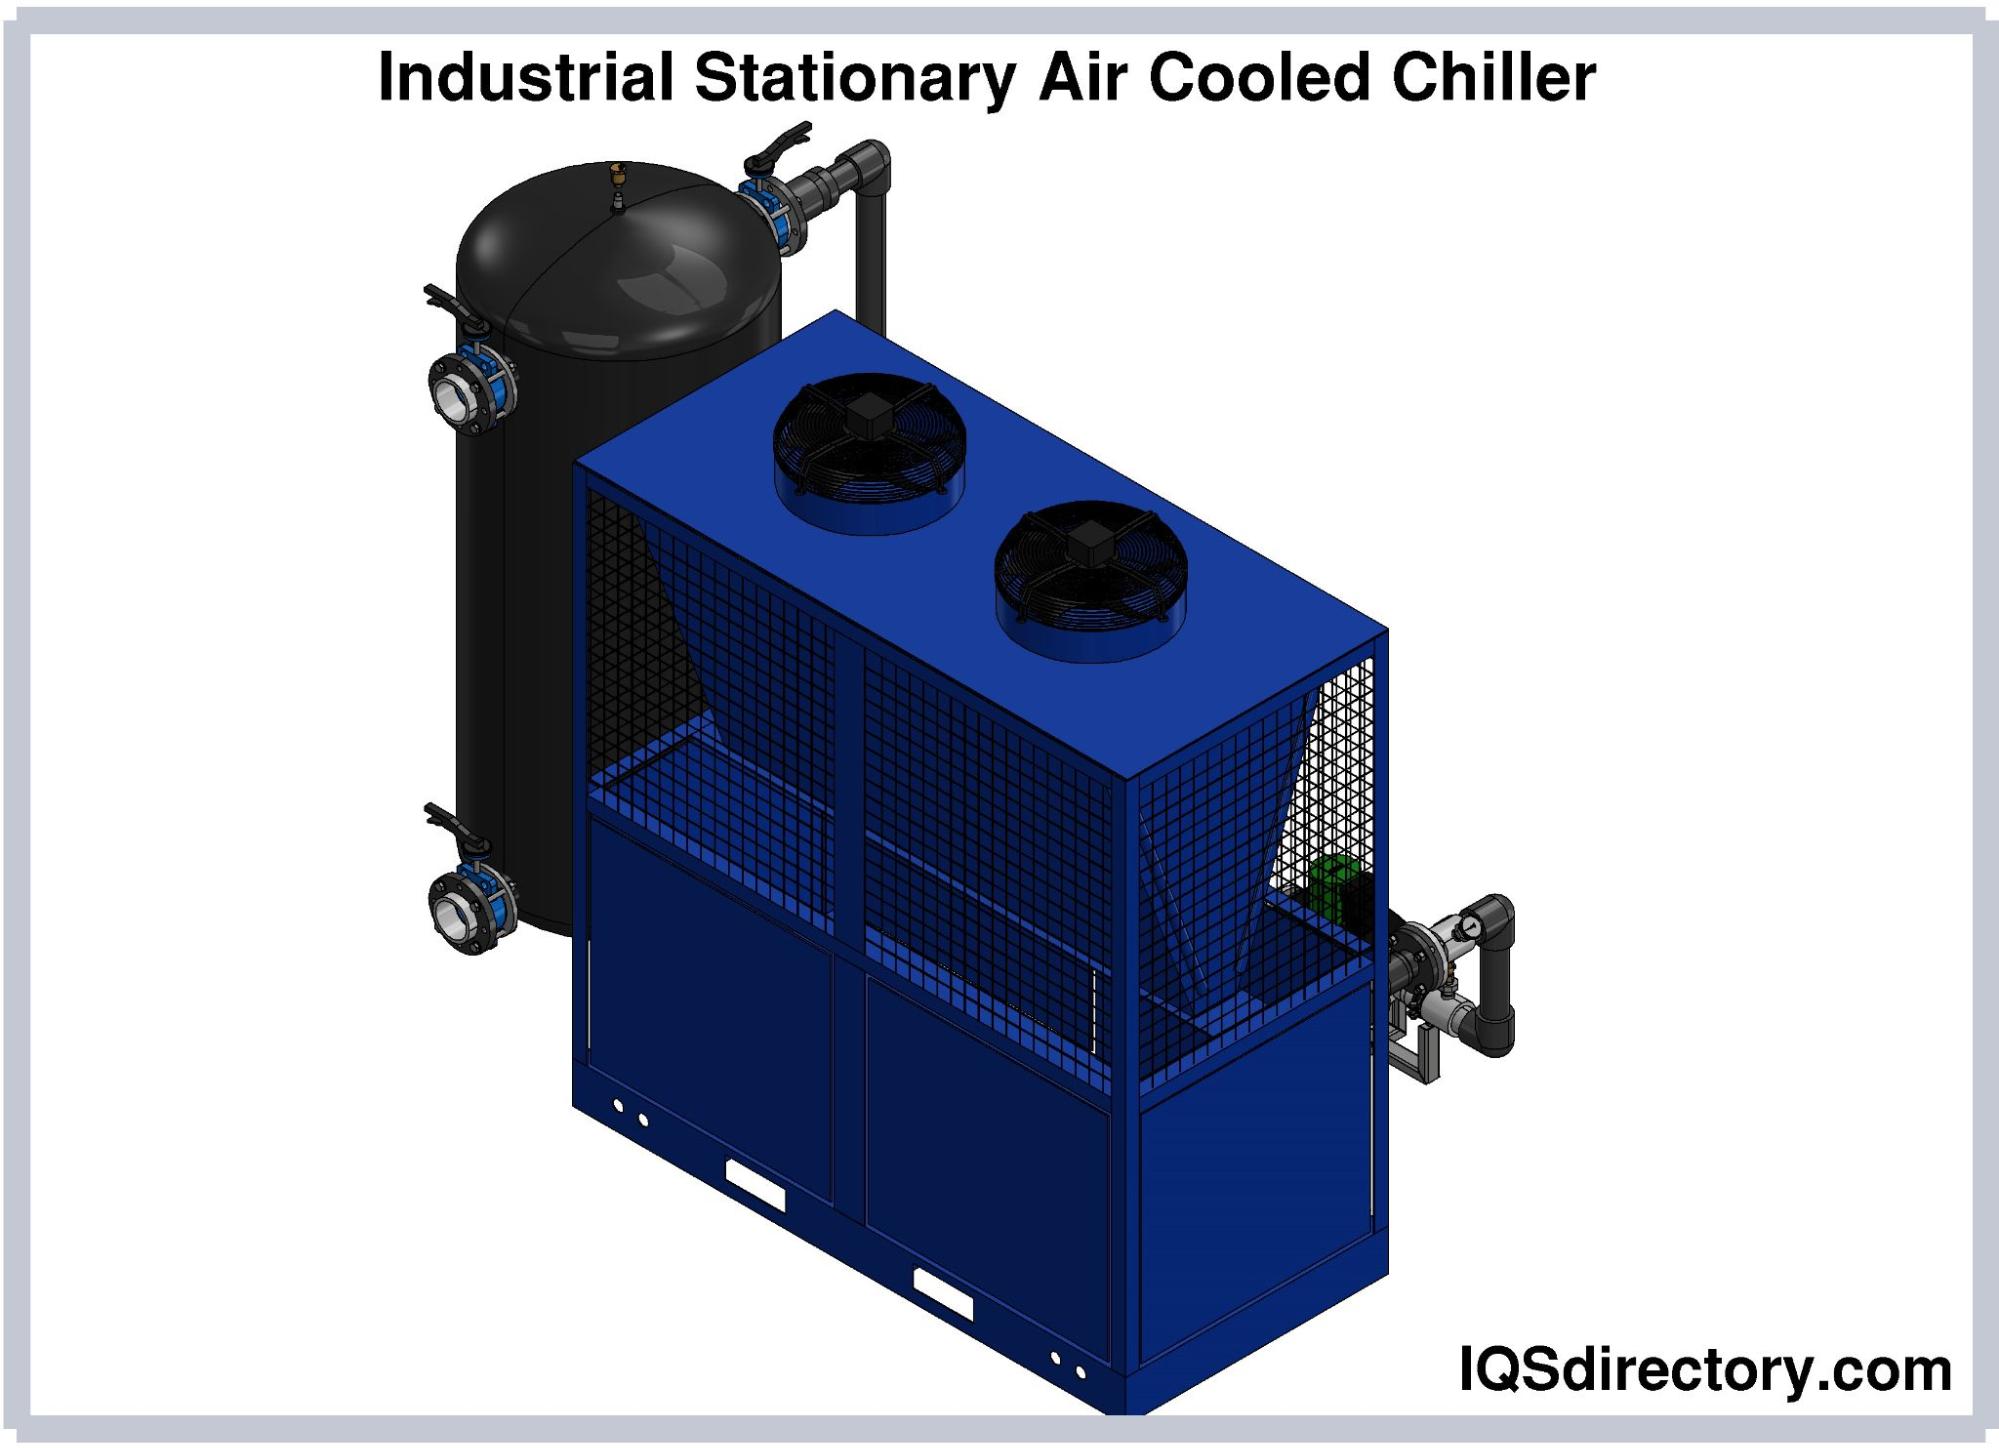 Industrial Stationary Air Cooled Chillers